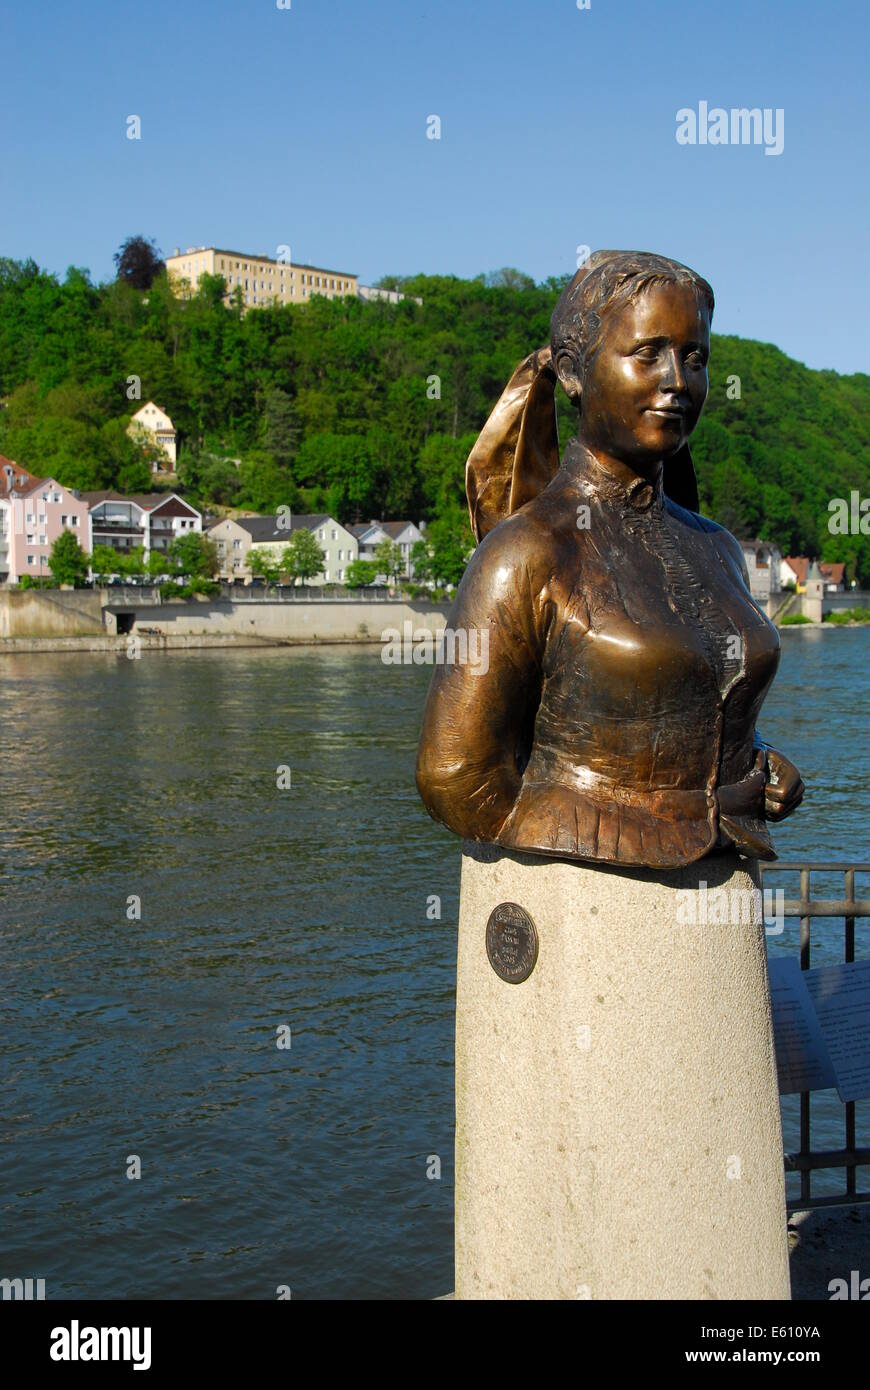 Statue of the poetess, Emerenz Meier, in on Danube River in Passau, Lower Bavaria, Germany. Stock Photo